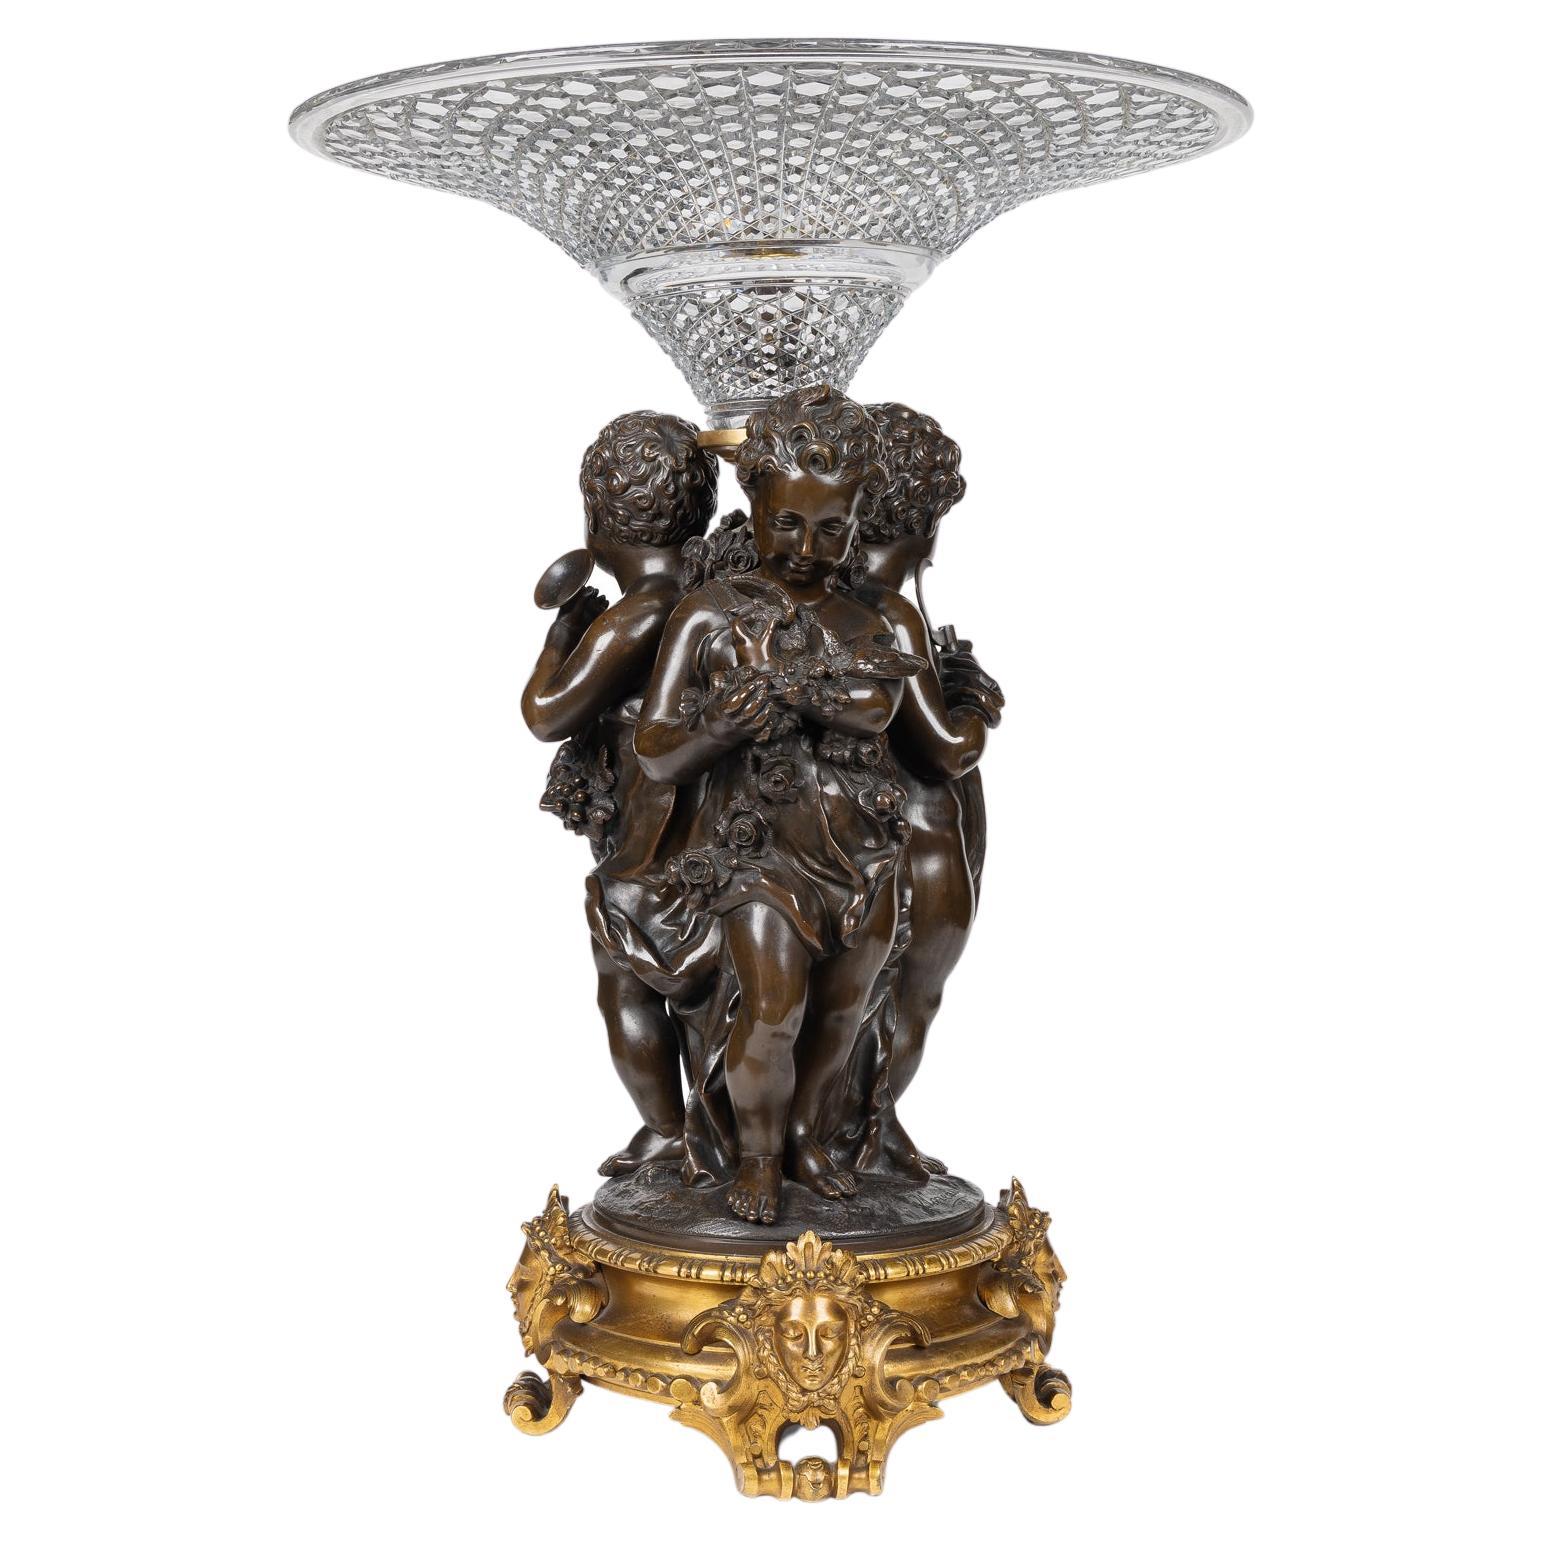 Mathurin Moreau, A Monumental French Bronze and Crystal Figural Centerpiece For Sale